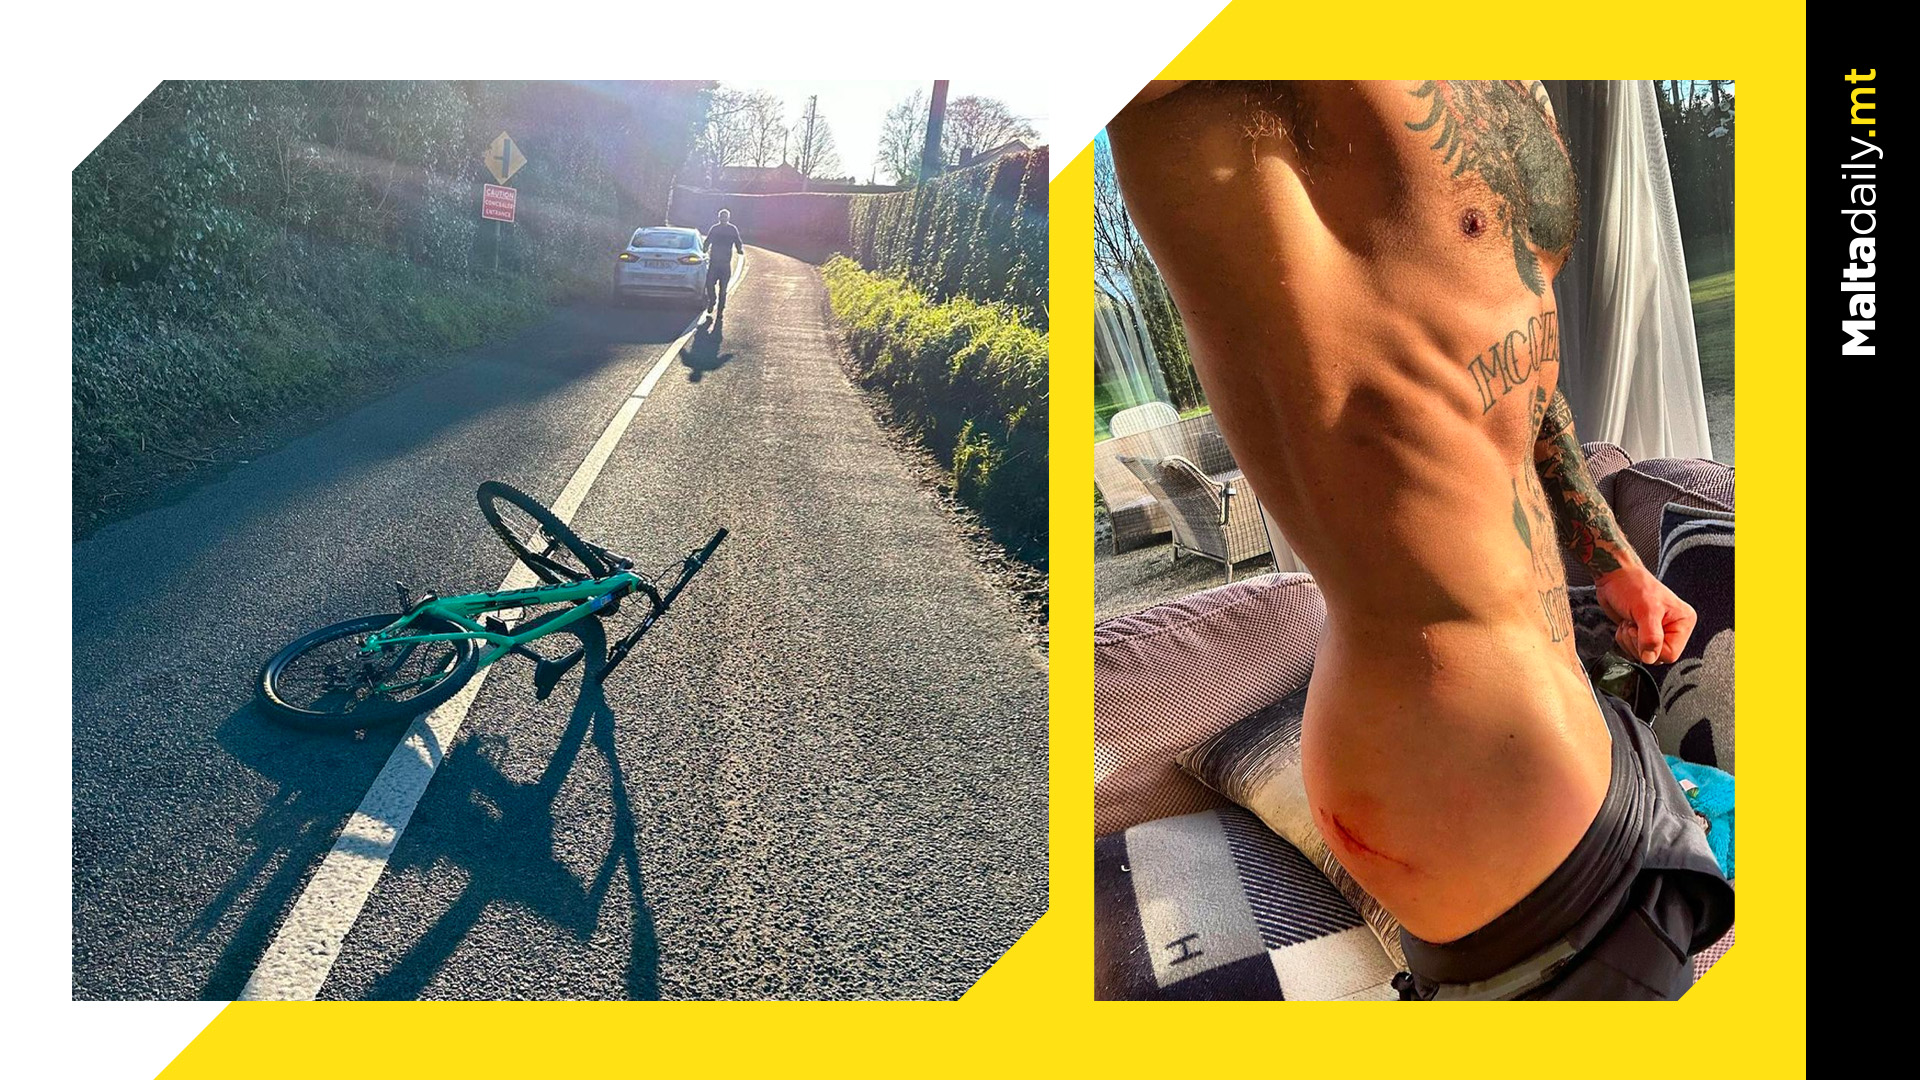 Conor McGregor hit by car whilst cycling in Ireland; thanks God "it wasn't his time"